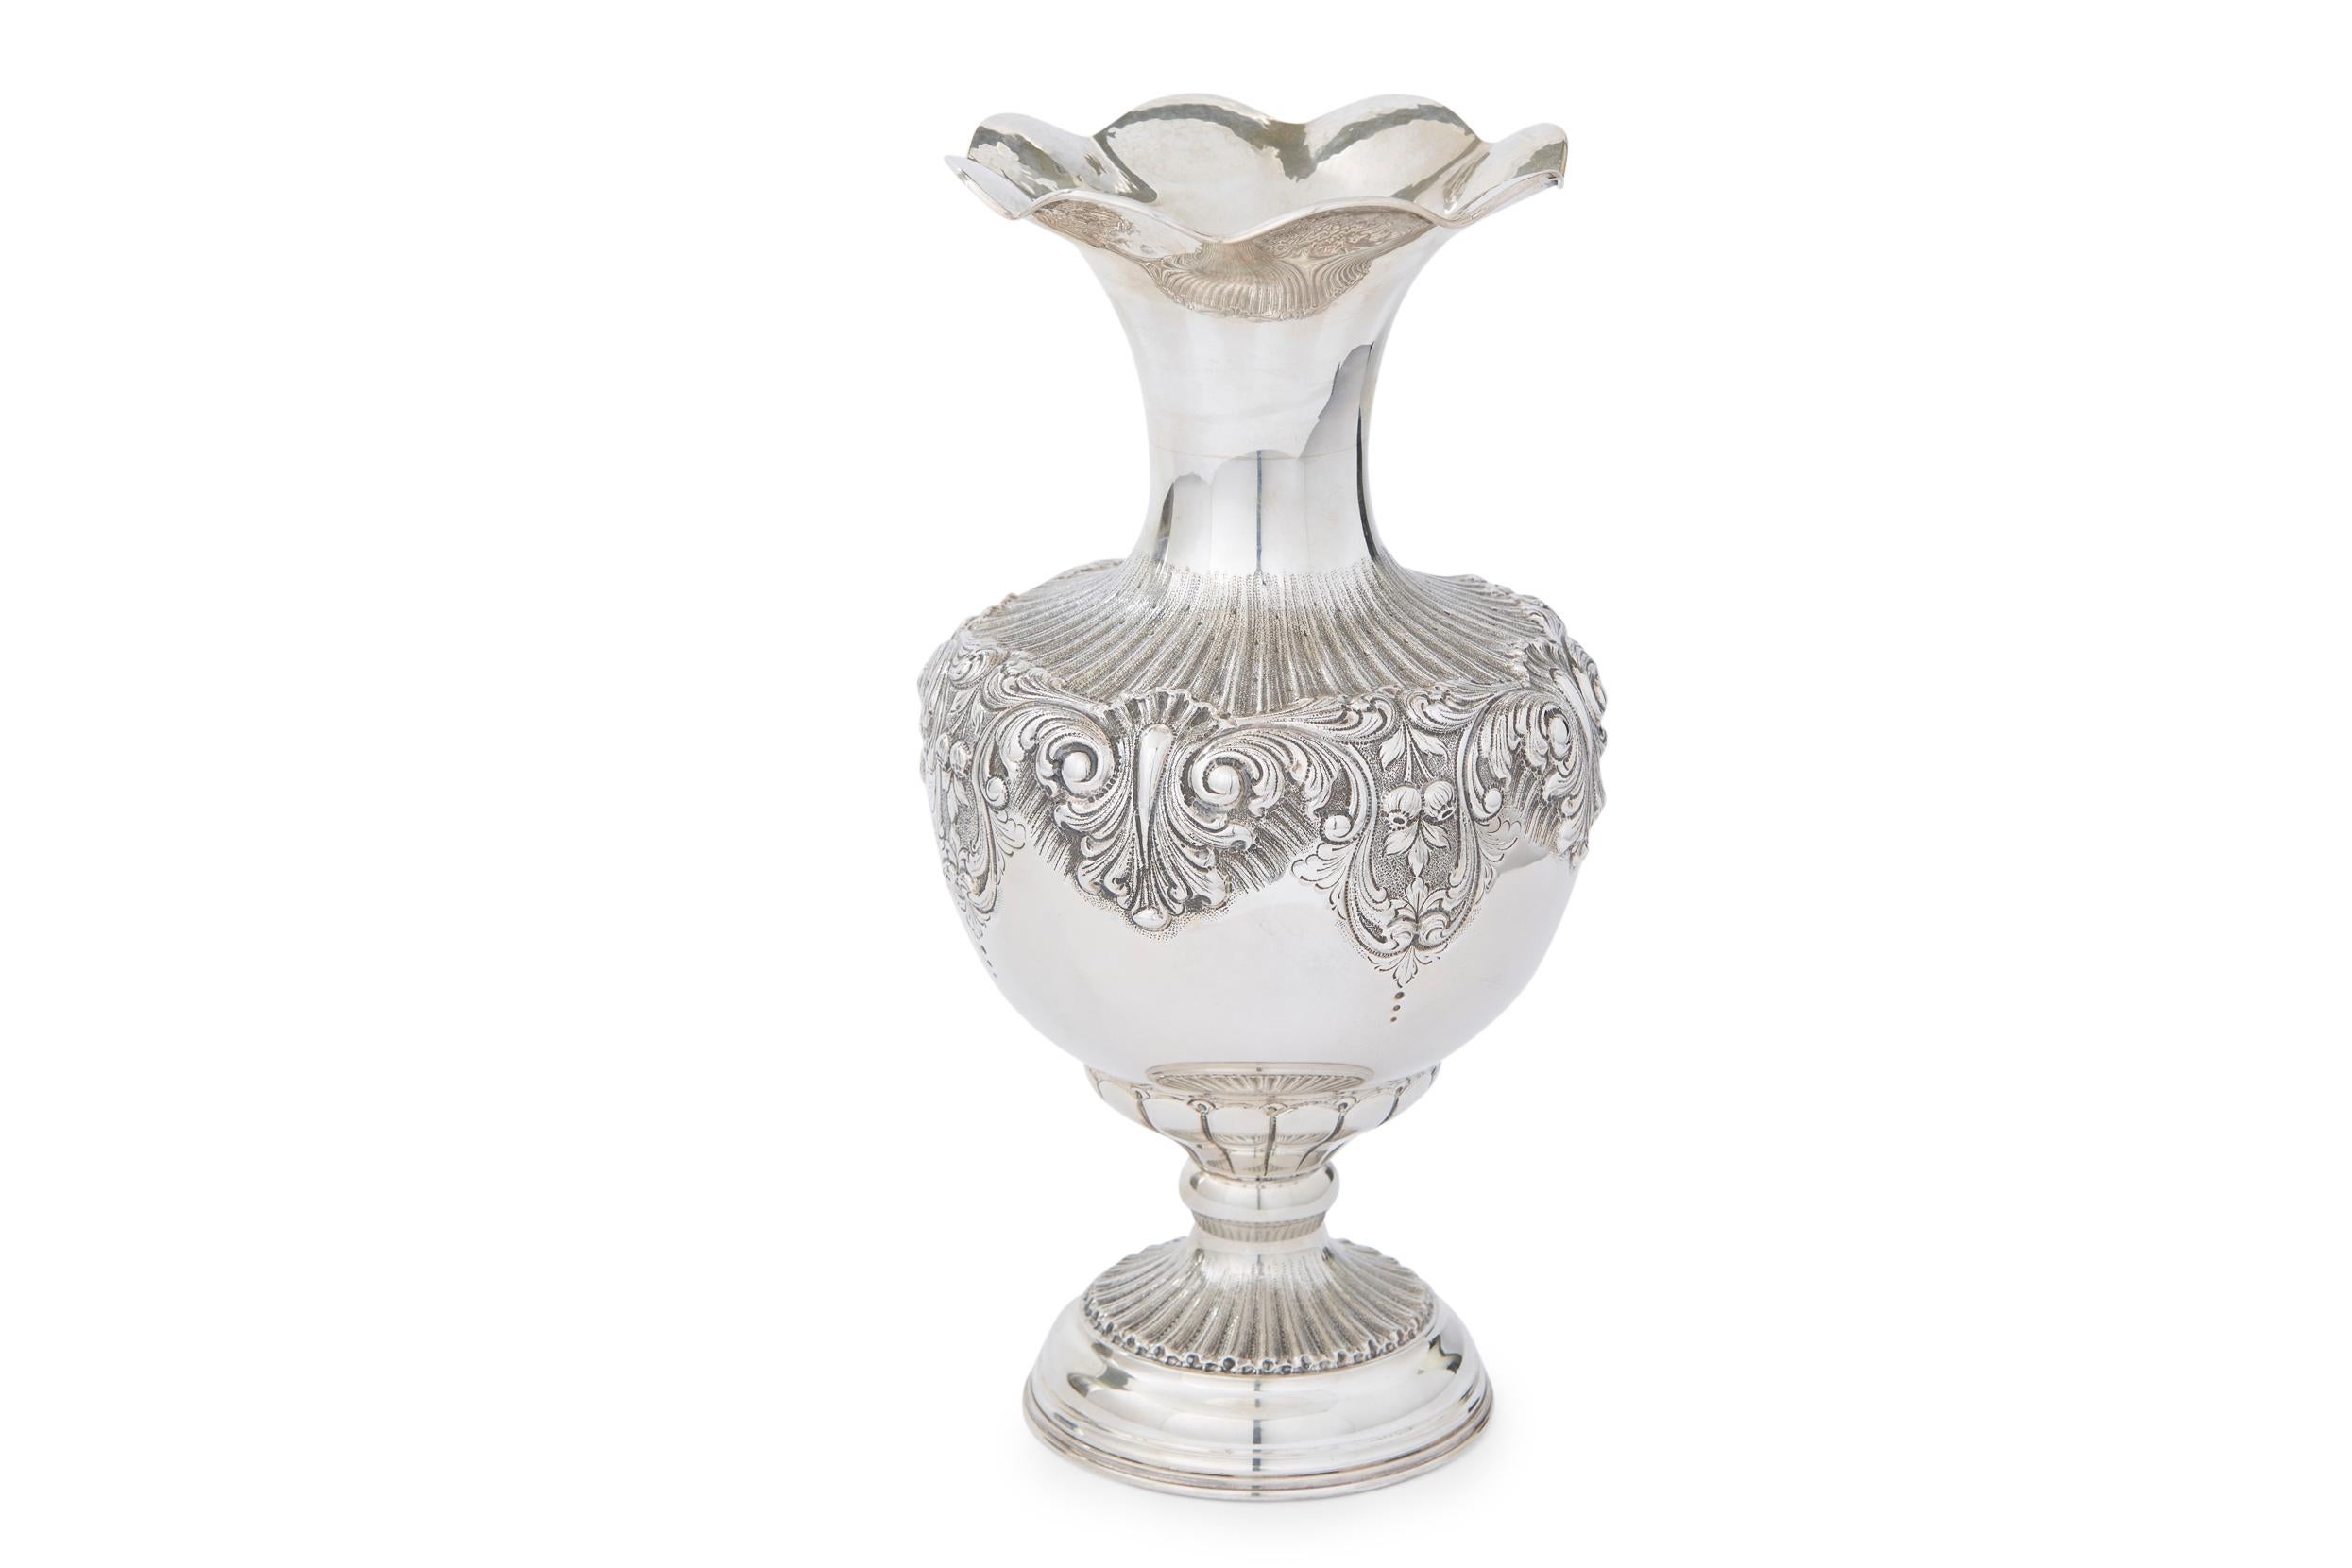 Very large 19th century sterling silver decorative centerpiece / vase with exterior design details and fluted neck top opening. The vase / piece is in great antique condition. Minor wear appropriate with age / use. Maker's mark undersigned. The